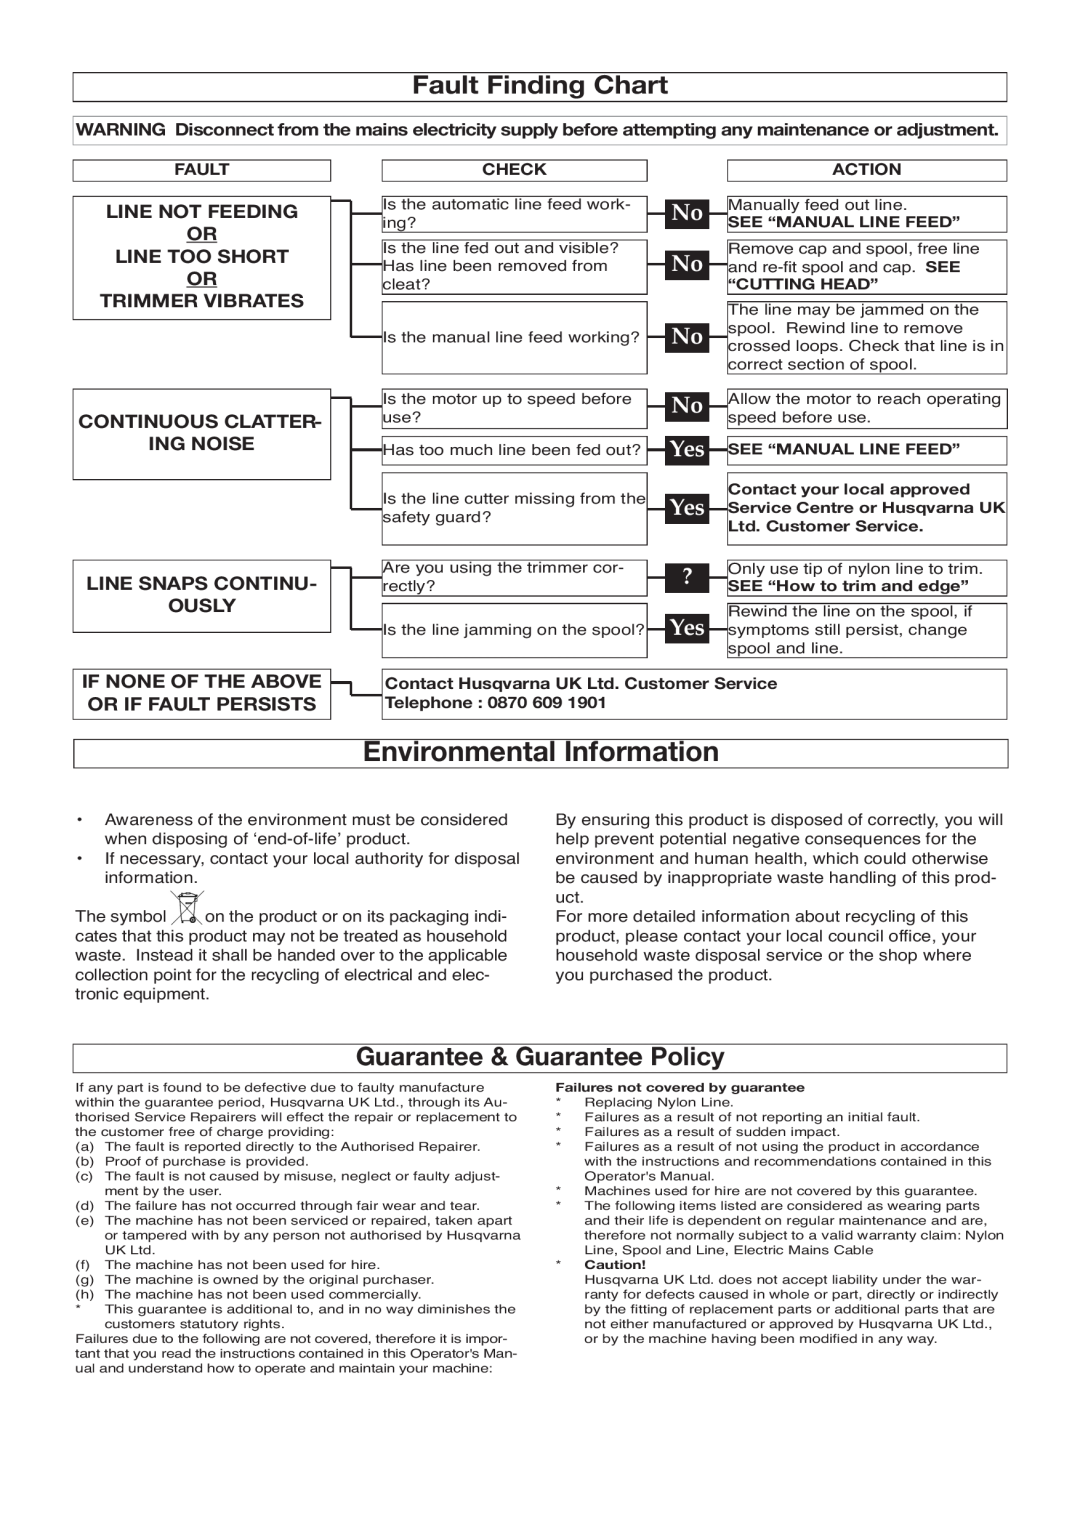 Flymo 600 HD Environmental Information, Fault Finding Chart, Guarantee & Guarantee Policy, Continuous Clatter Ing Noise 